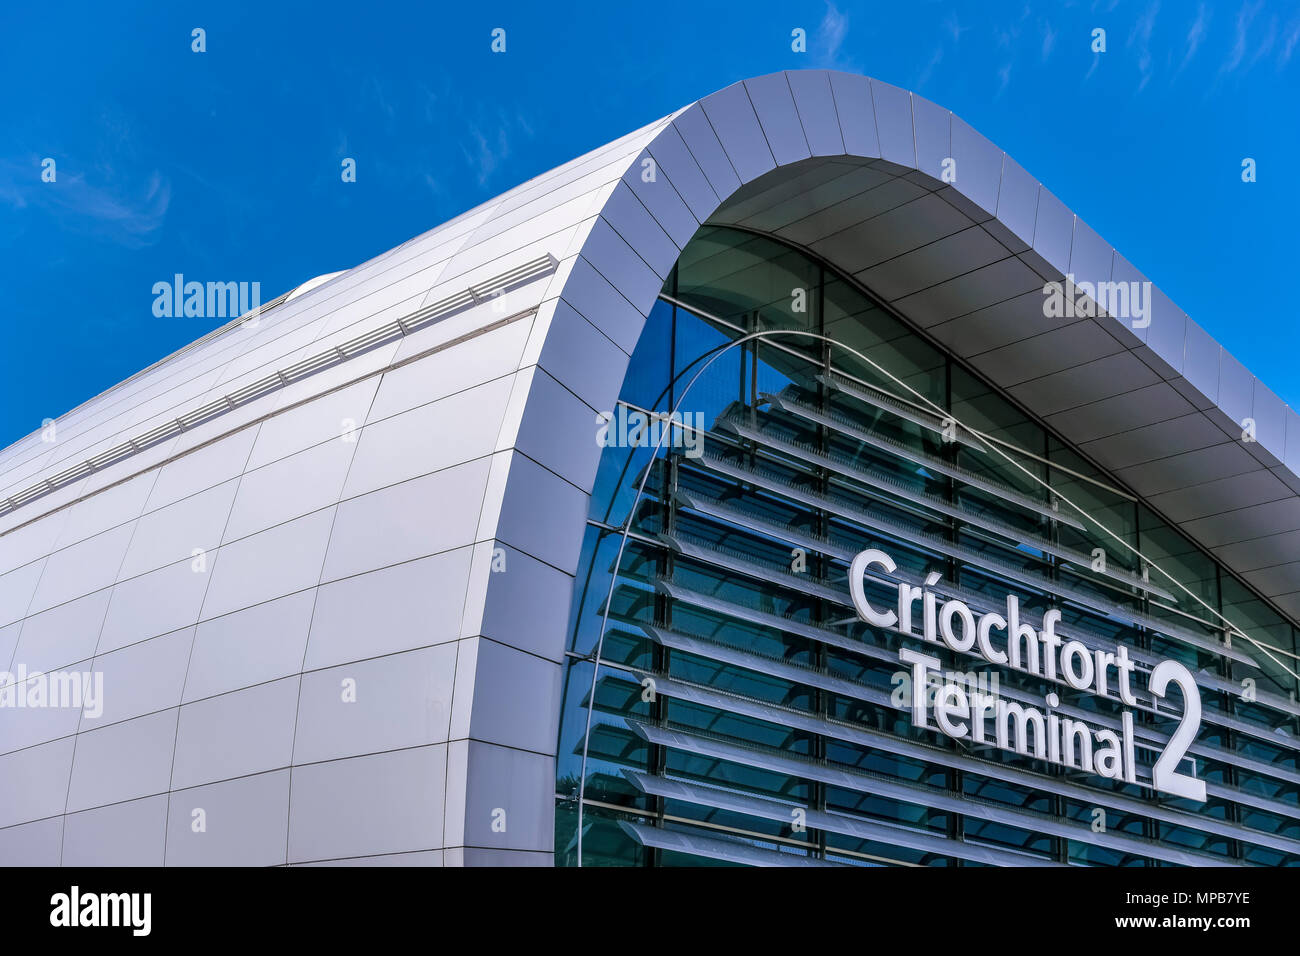 New Terminal 2, T2 Criochfort Dublin Interenational Airport DUB, by architects Pascall & Watson. Blue sky, copy space, close up. Ireland, Europe, EU. Stock Photo